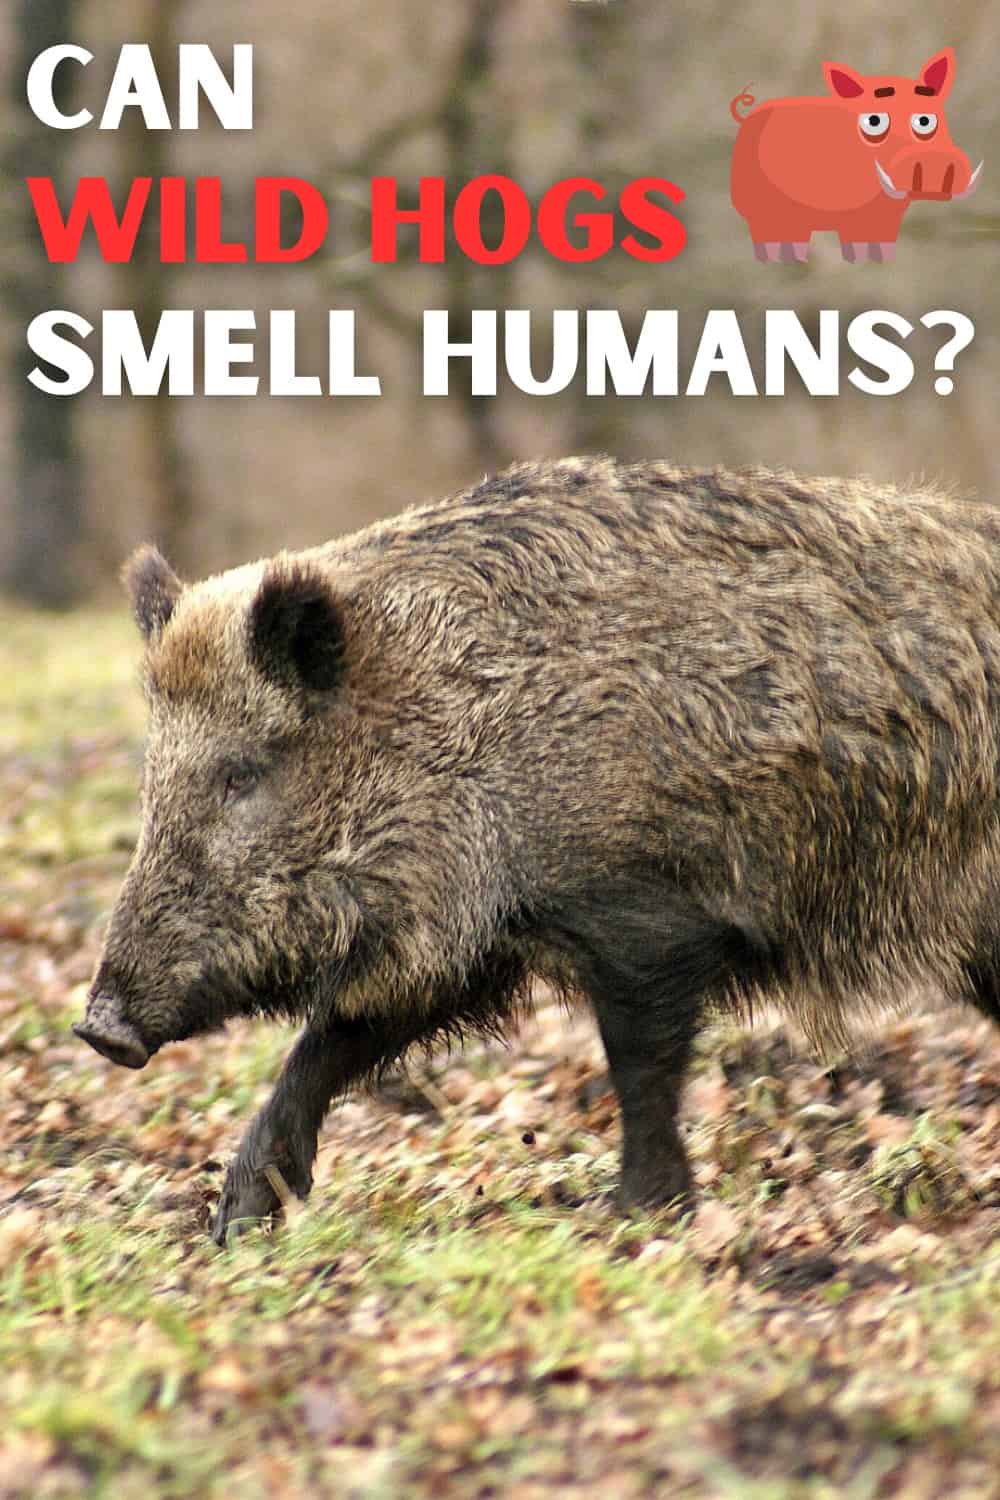 hogs can smell human scent